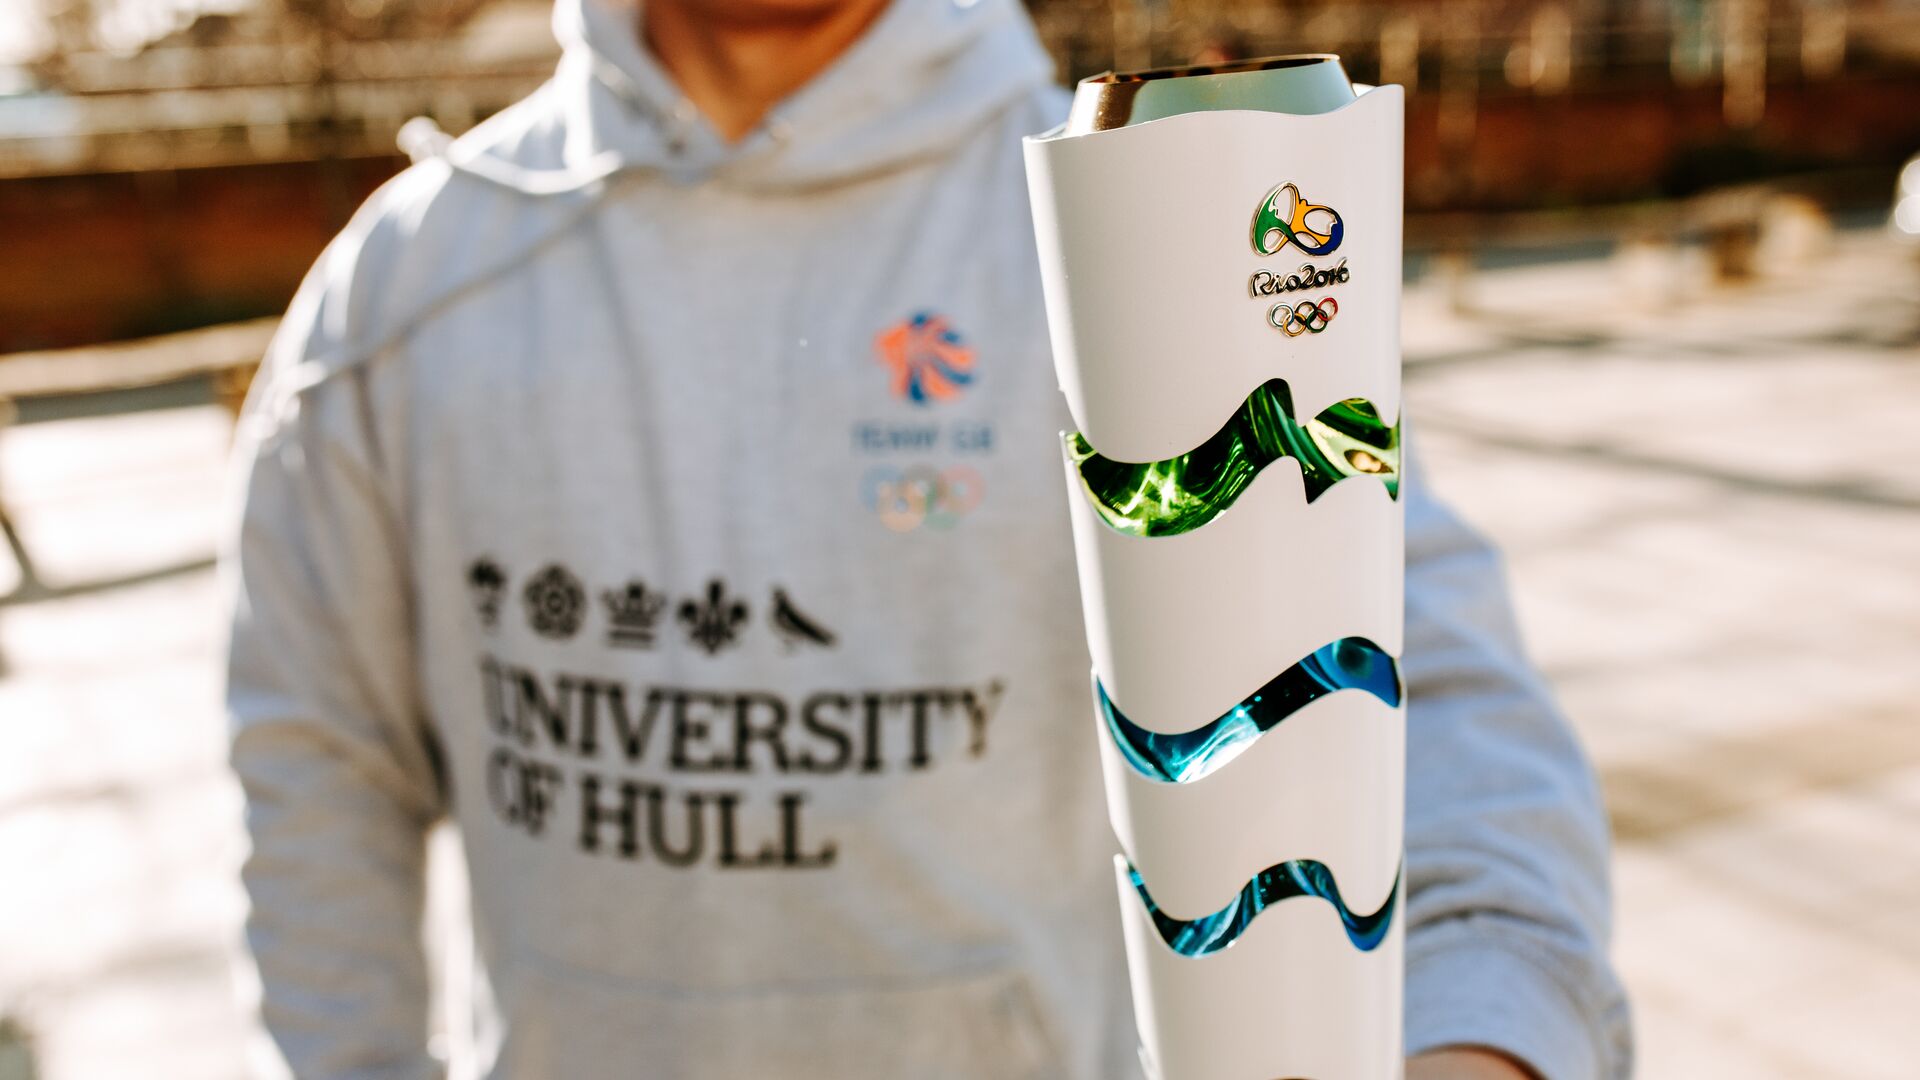 Team GB Olympic Torch at Partnership Launch - 28th January 2019